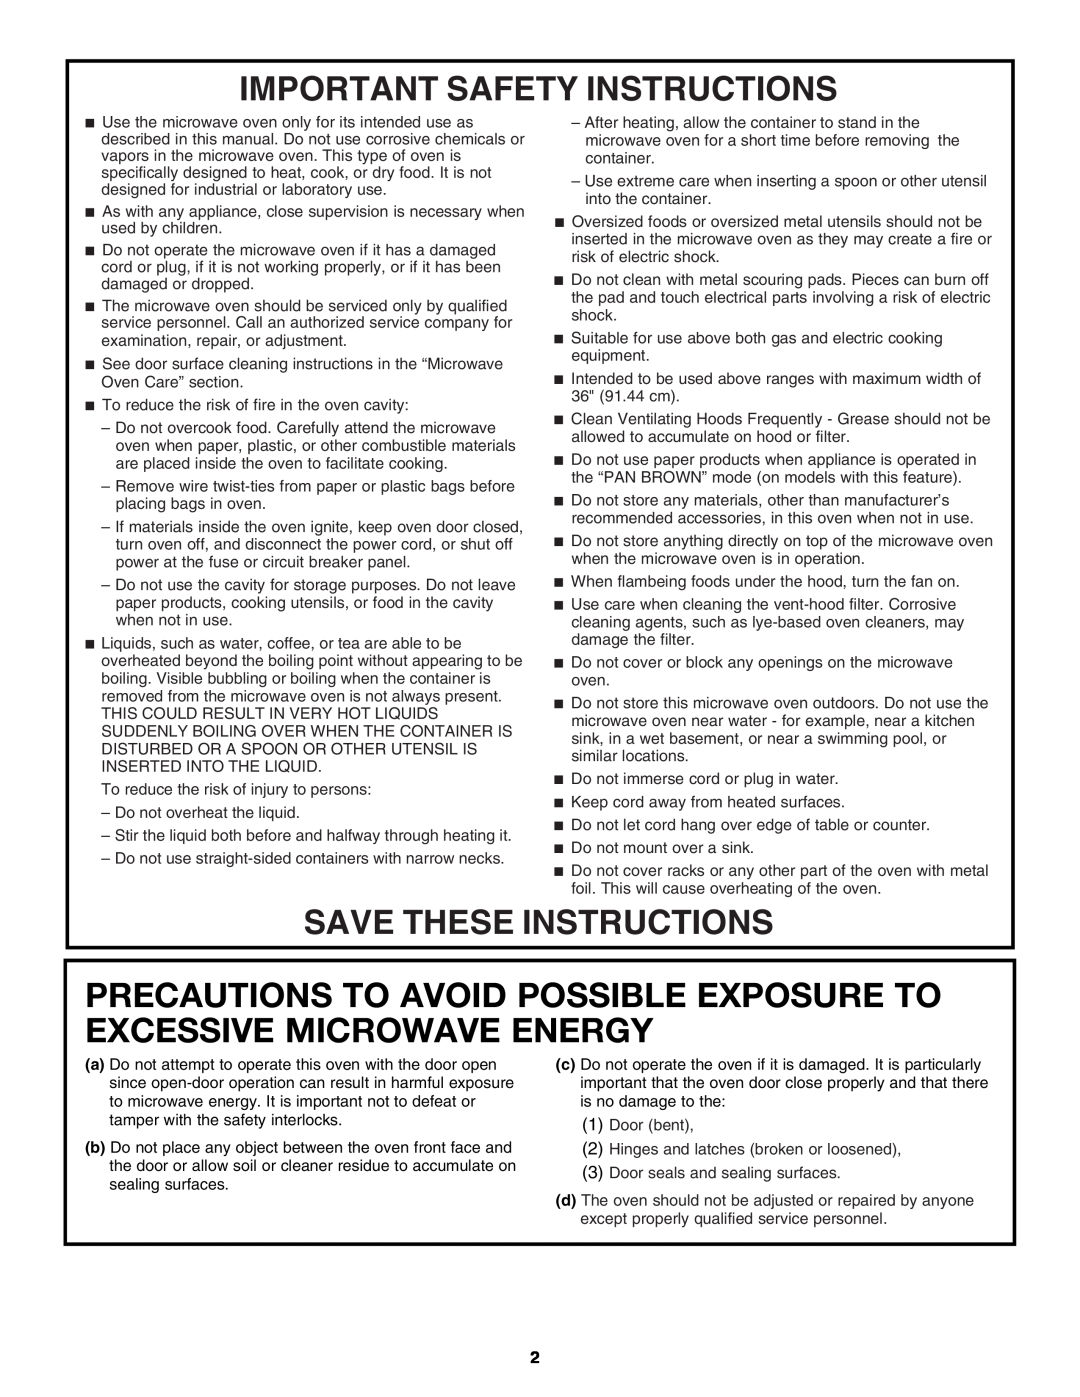 Amana AMV1160VAW Precautions To Avoid Possible Exposure To Excessive Microwave Energy, Important Safety Instructions 